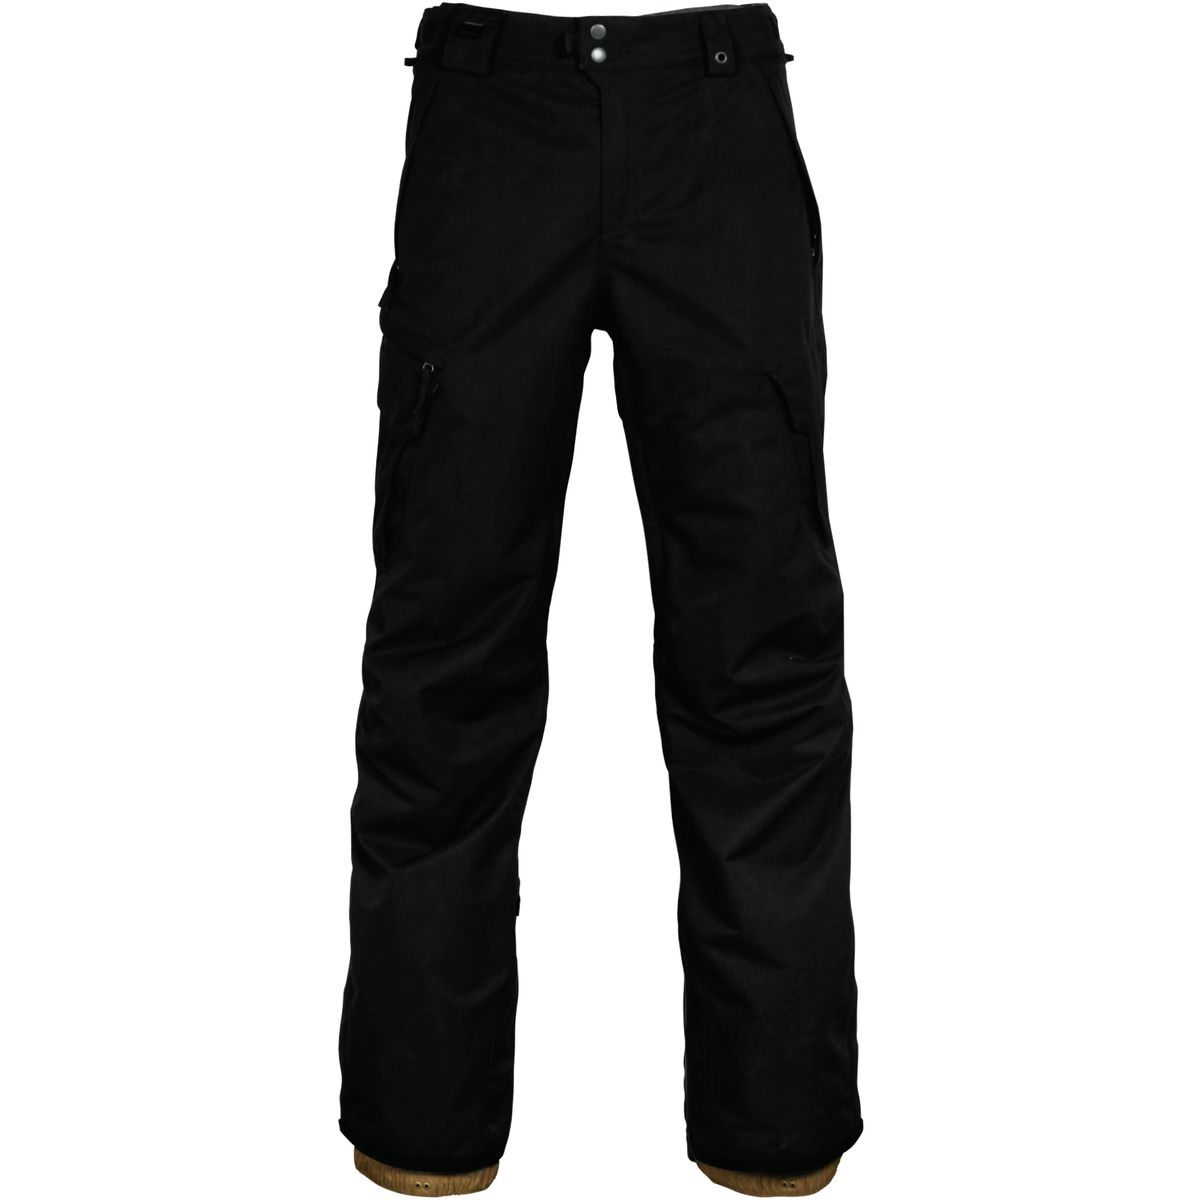 686 Authentic Smarty Cargo 3-In-1 Pant - Men's | Backcountry.com